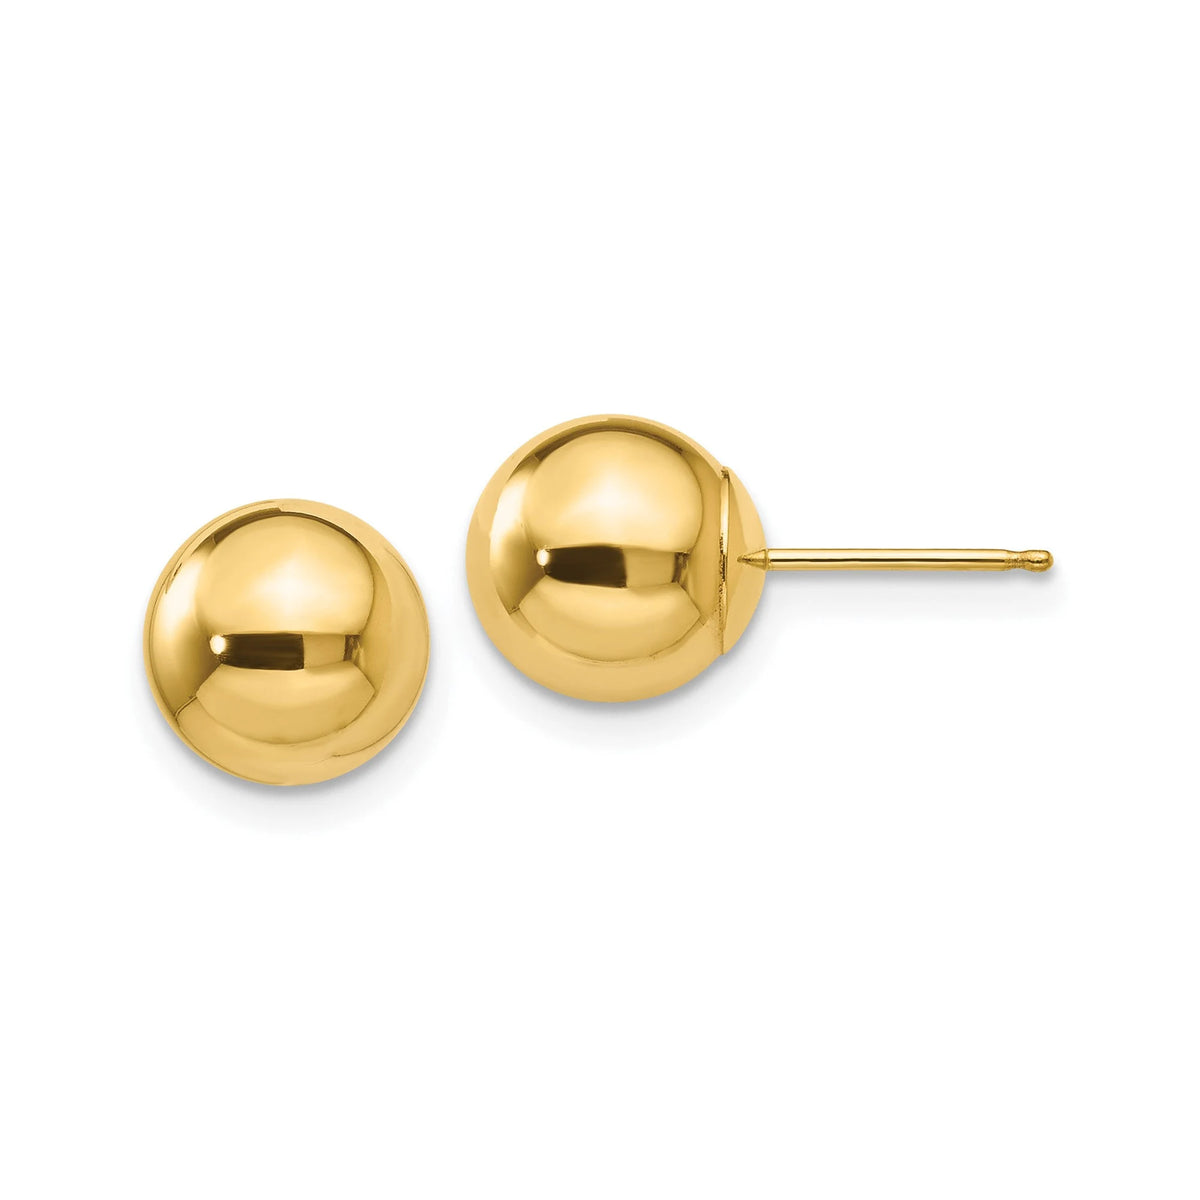 10k Yellow Gold Ball Post Earrings Genuine 10k Yellow Gold (Not Plated or Filled) Made in USA - Gift Box Included